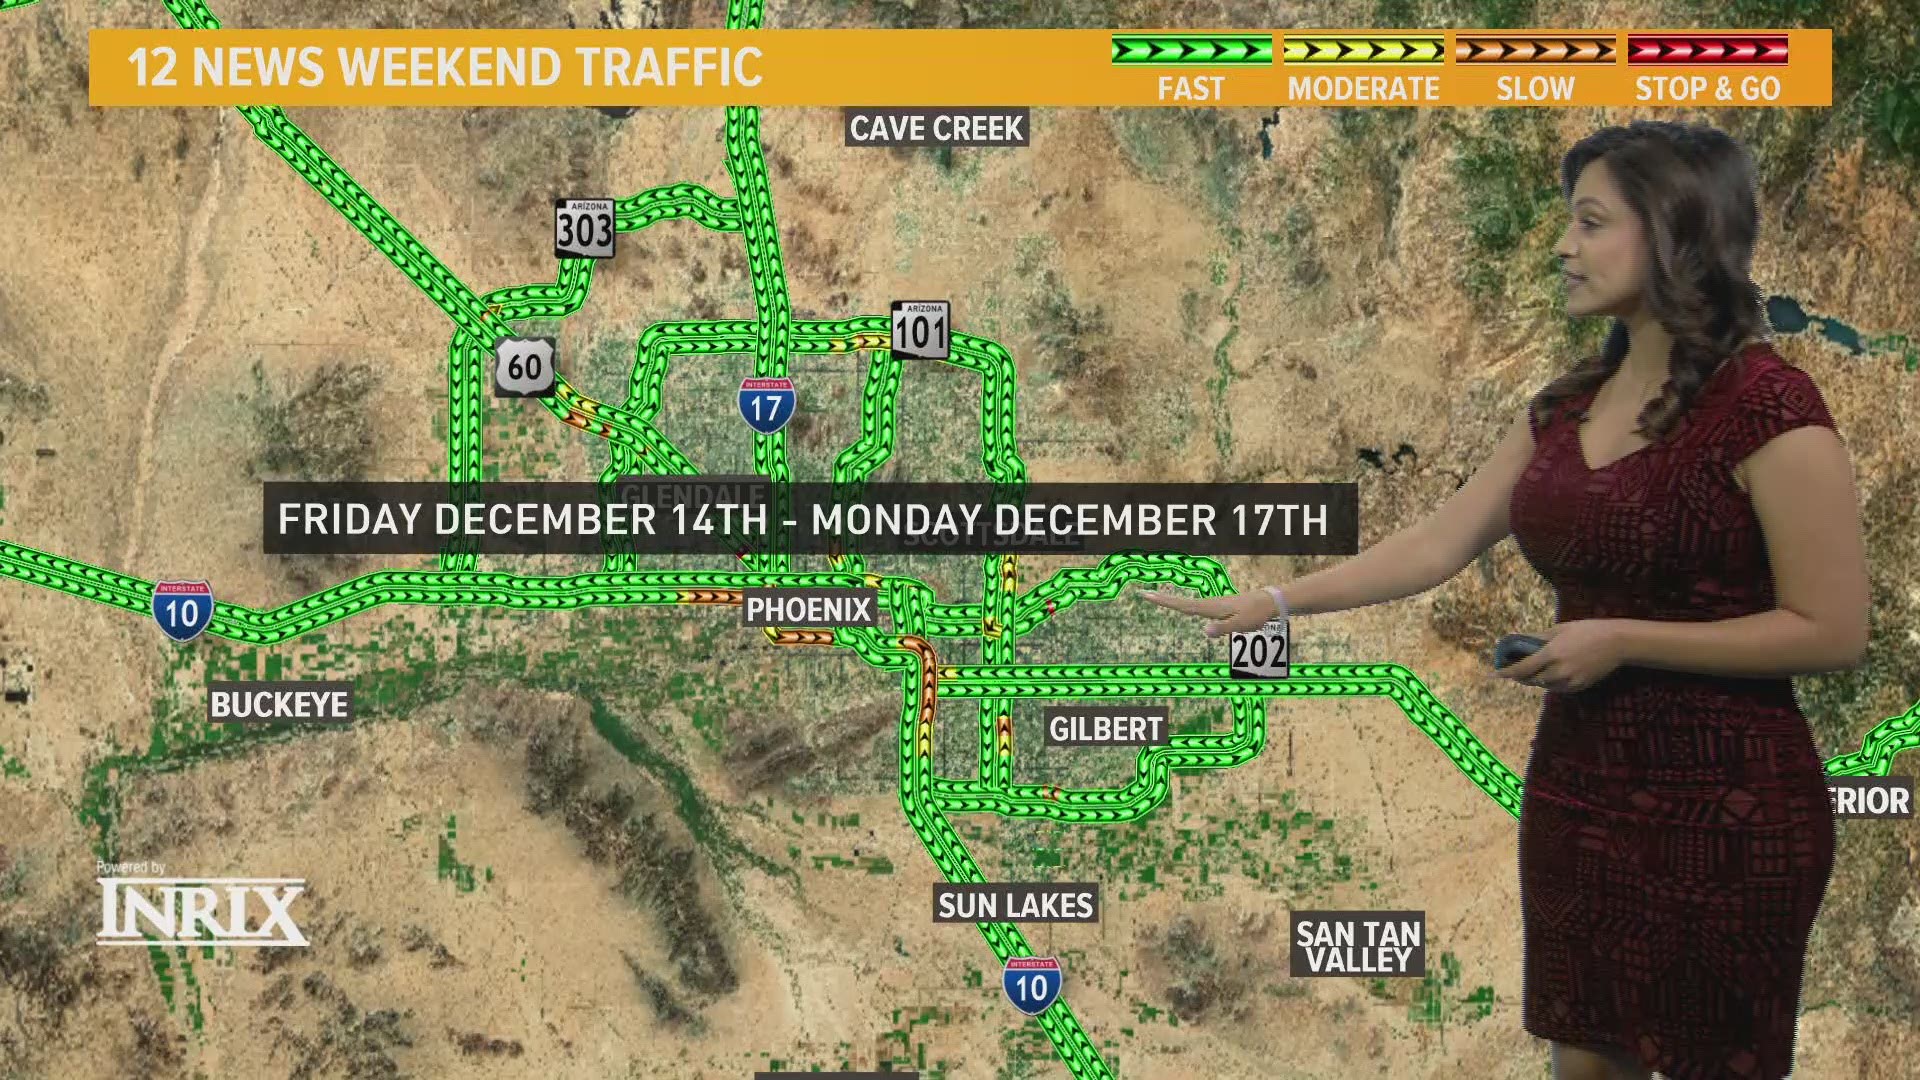 Here's your weekend traffic outlook from Friday, December 14 to Monday, December 17.